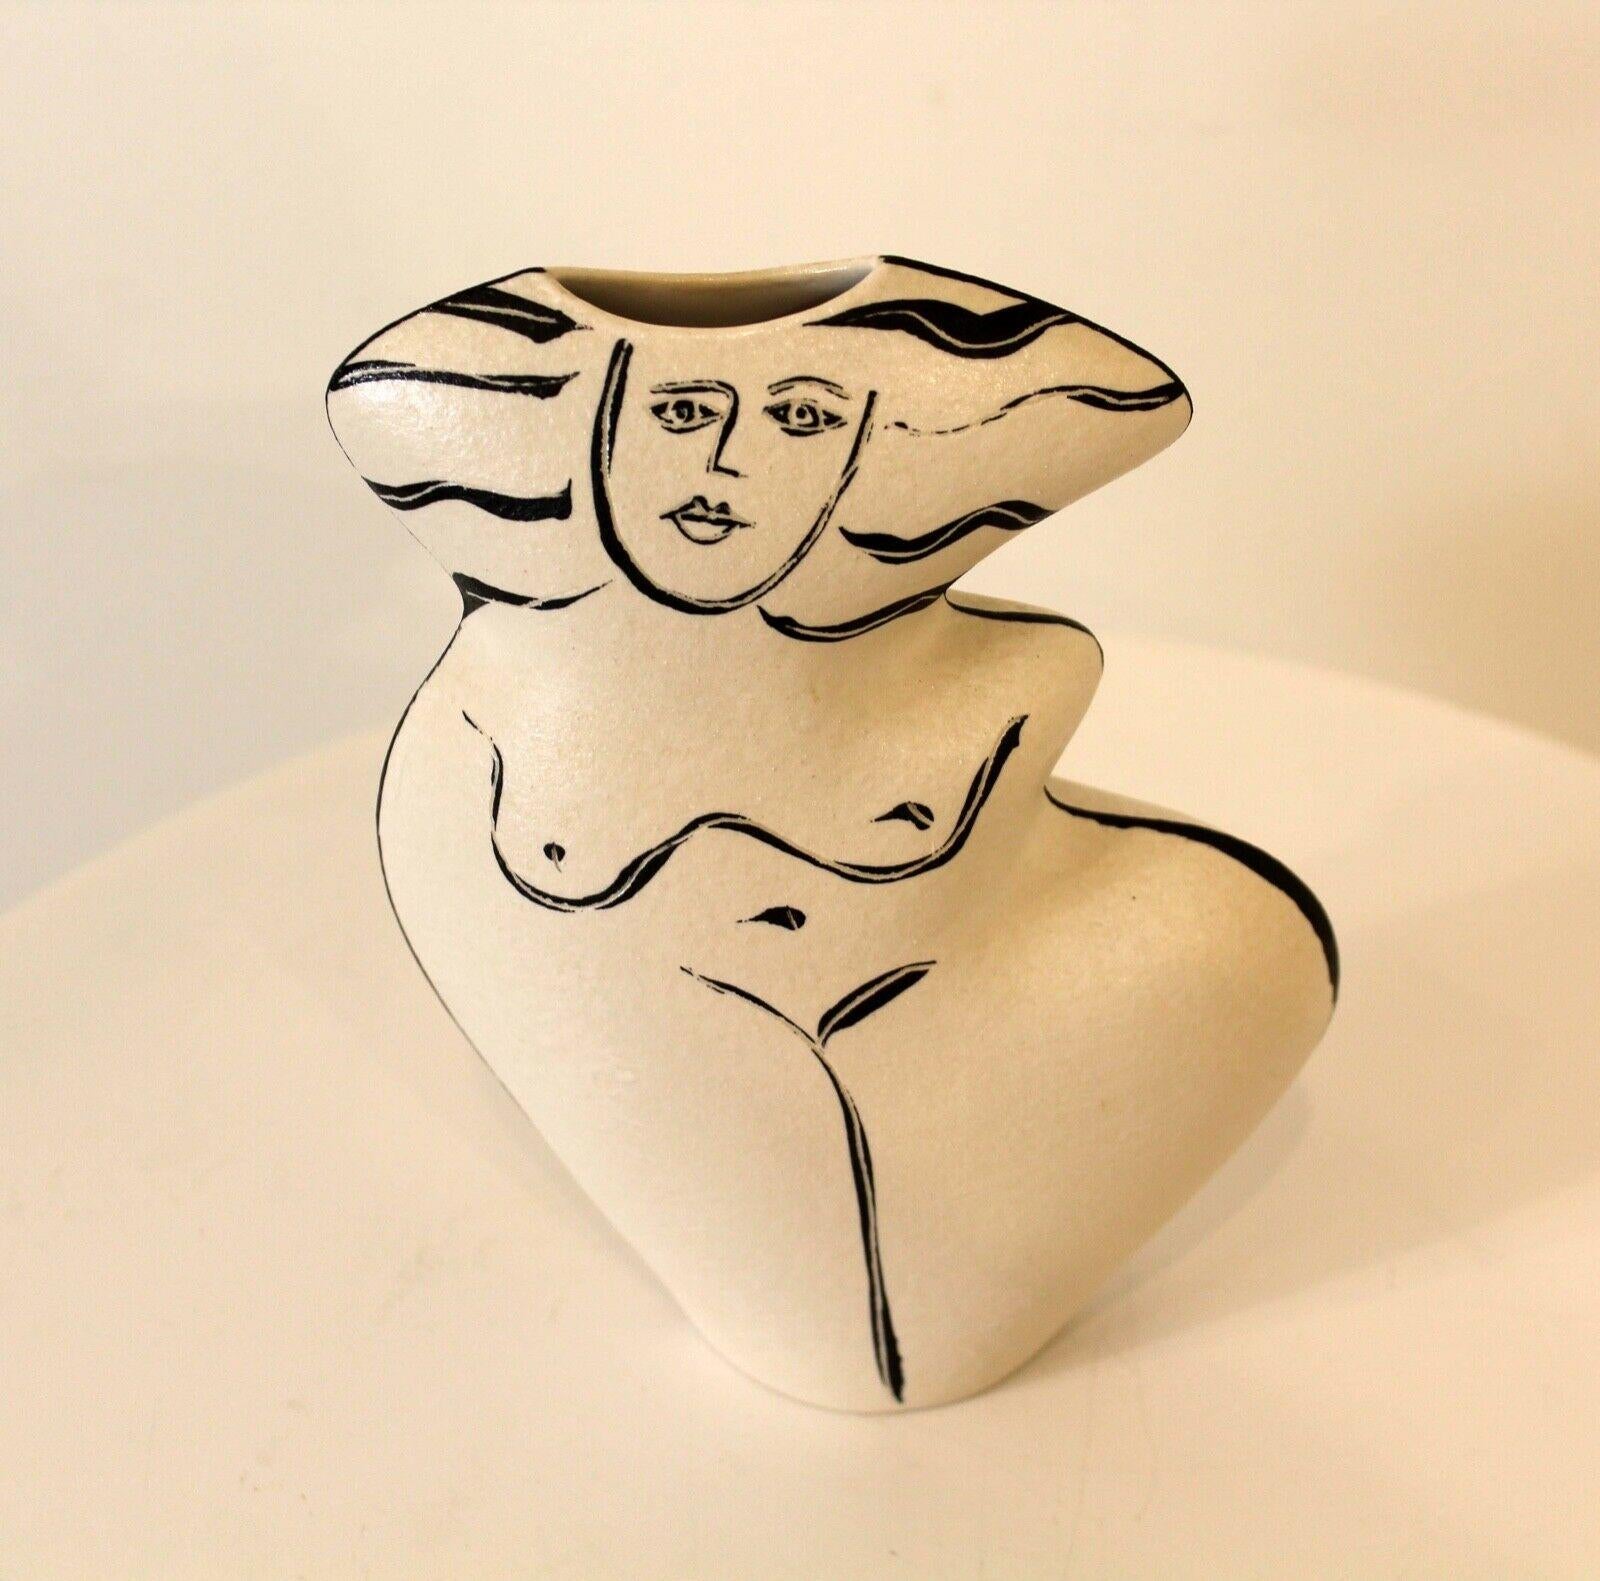 A black on white vase by Donna Polseno depicting a female body along asymmetrical curves on the vessel. nude figural vase by Donna Polseno. Signed ‘Polseno’ to the bottom. In very good condition with no chips.


Dimensions: 5.75w x 2.5d x 7.25h.